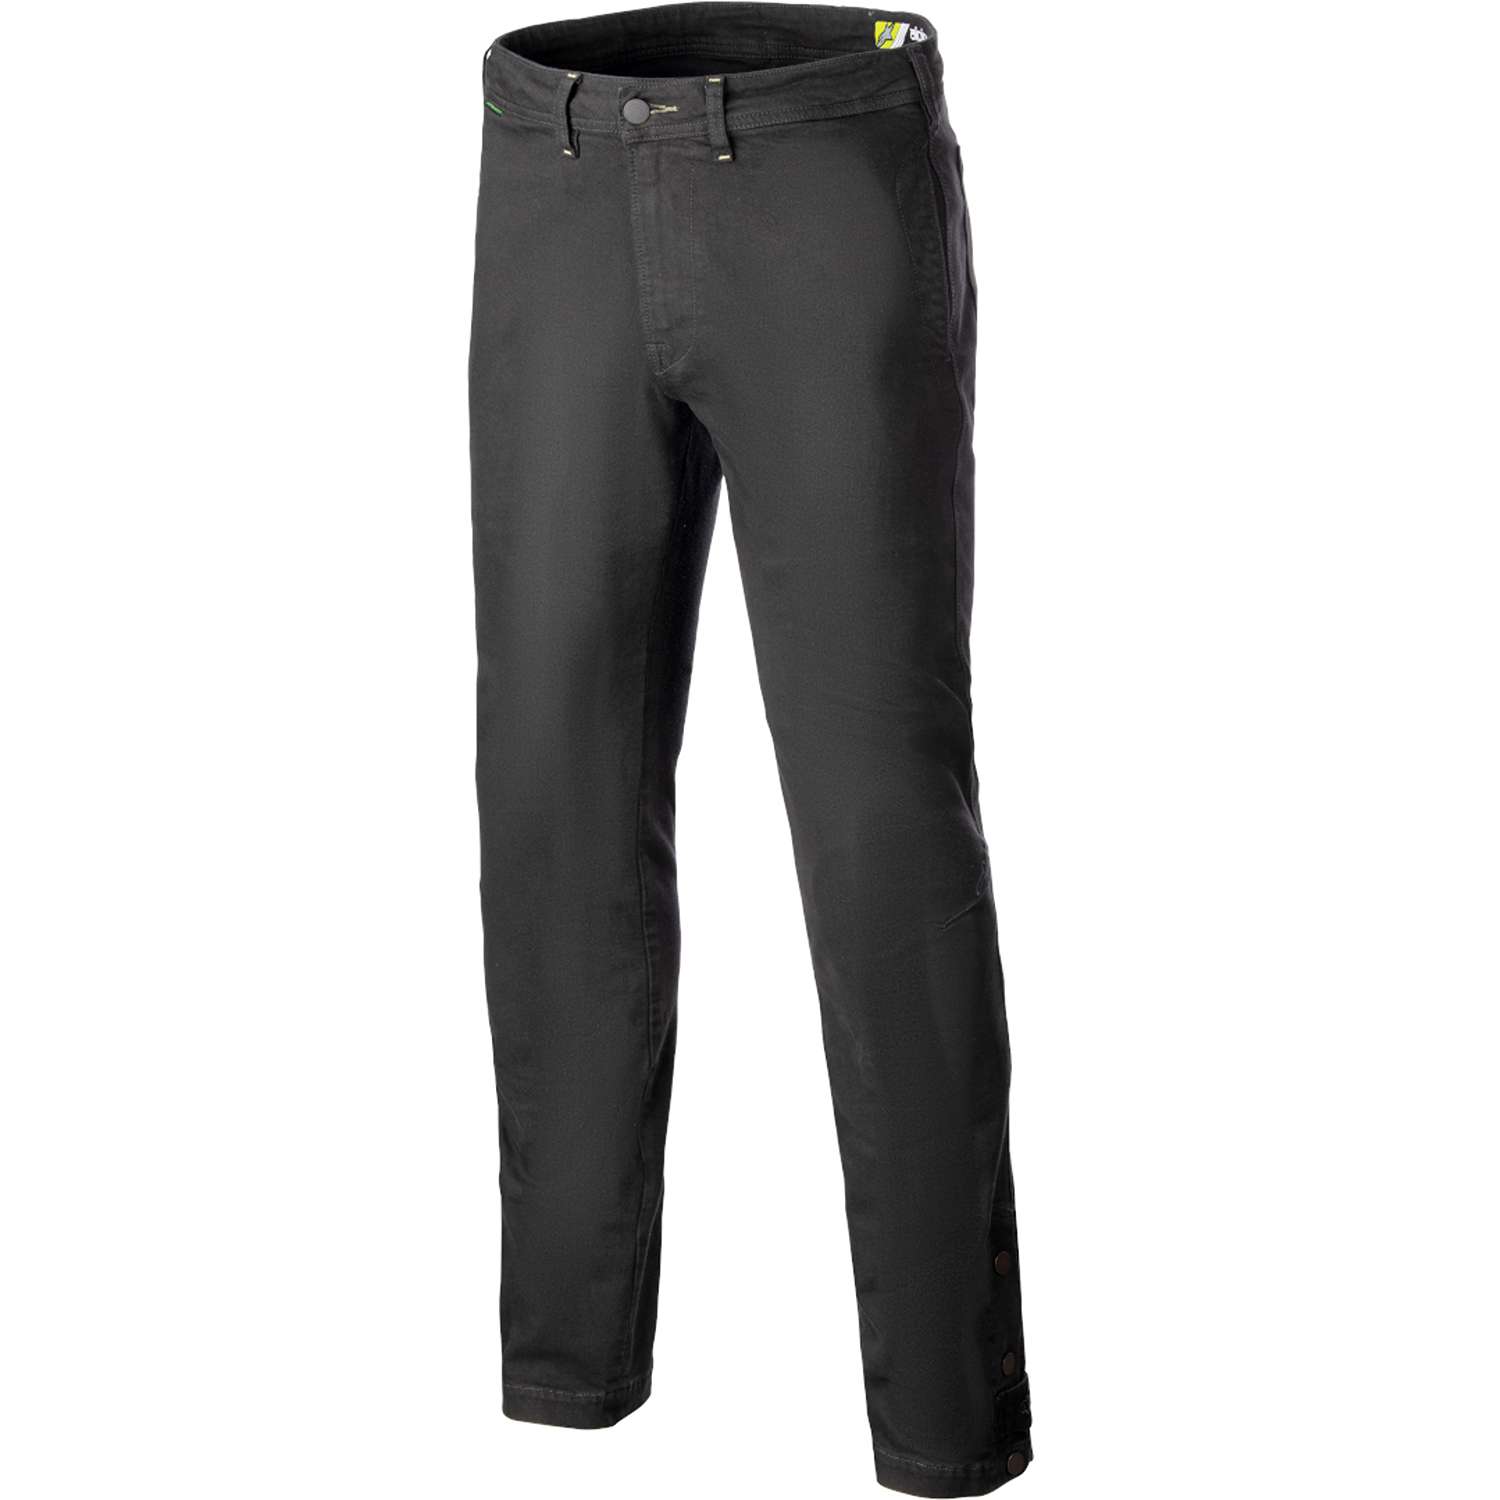 Image of Alpinestars Stratos Regular Fit Tech Riding Pants Anthracite Taille 30